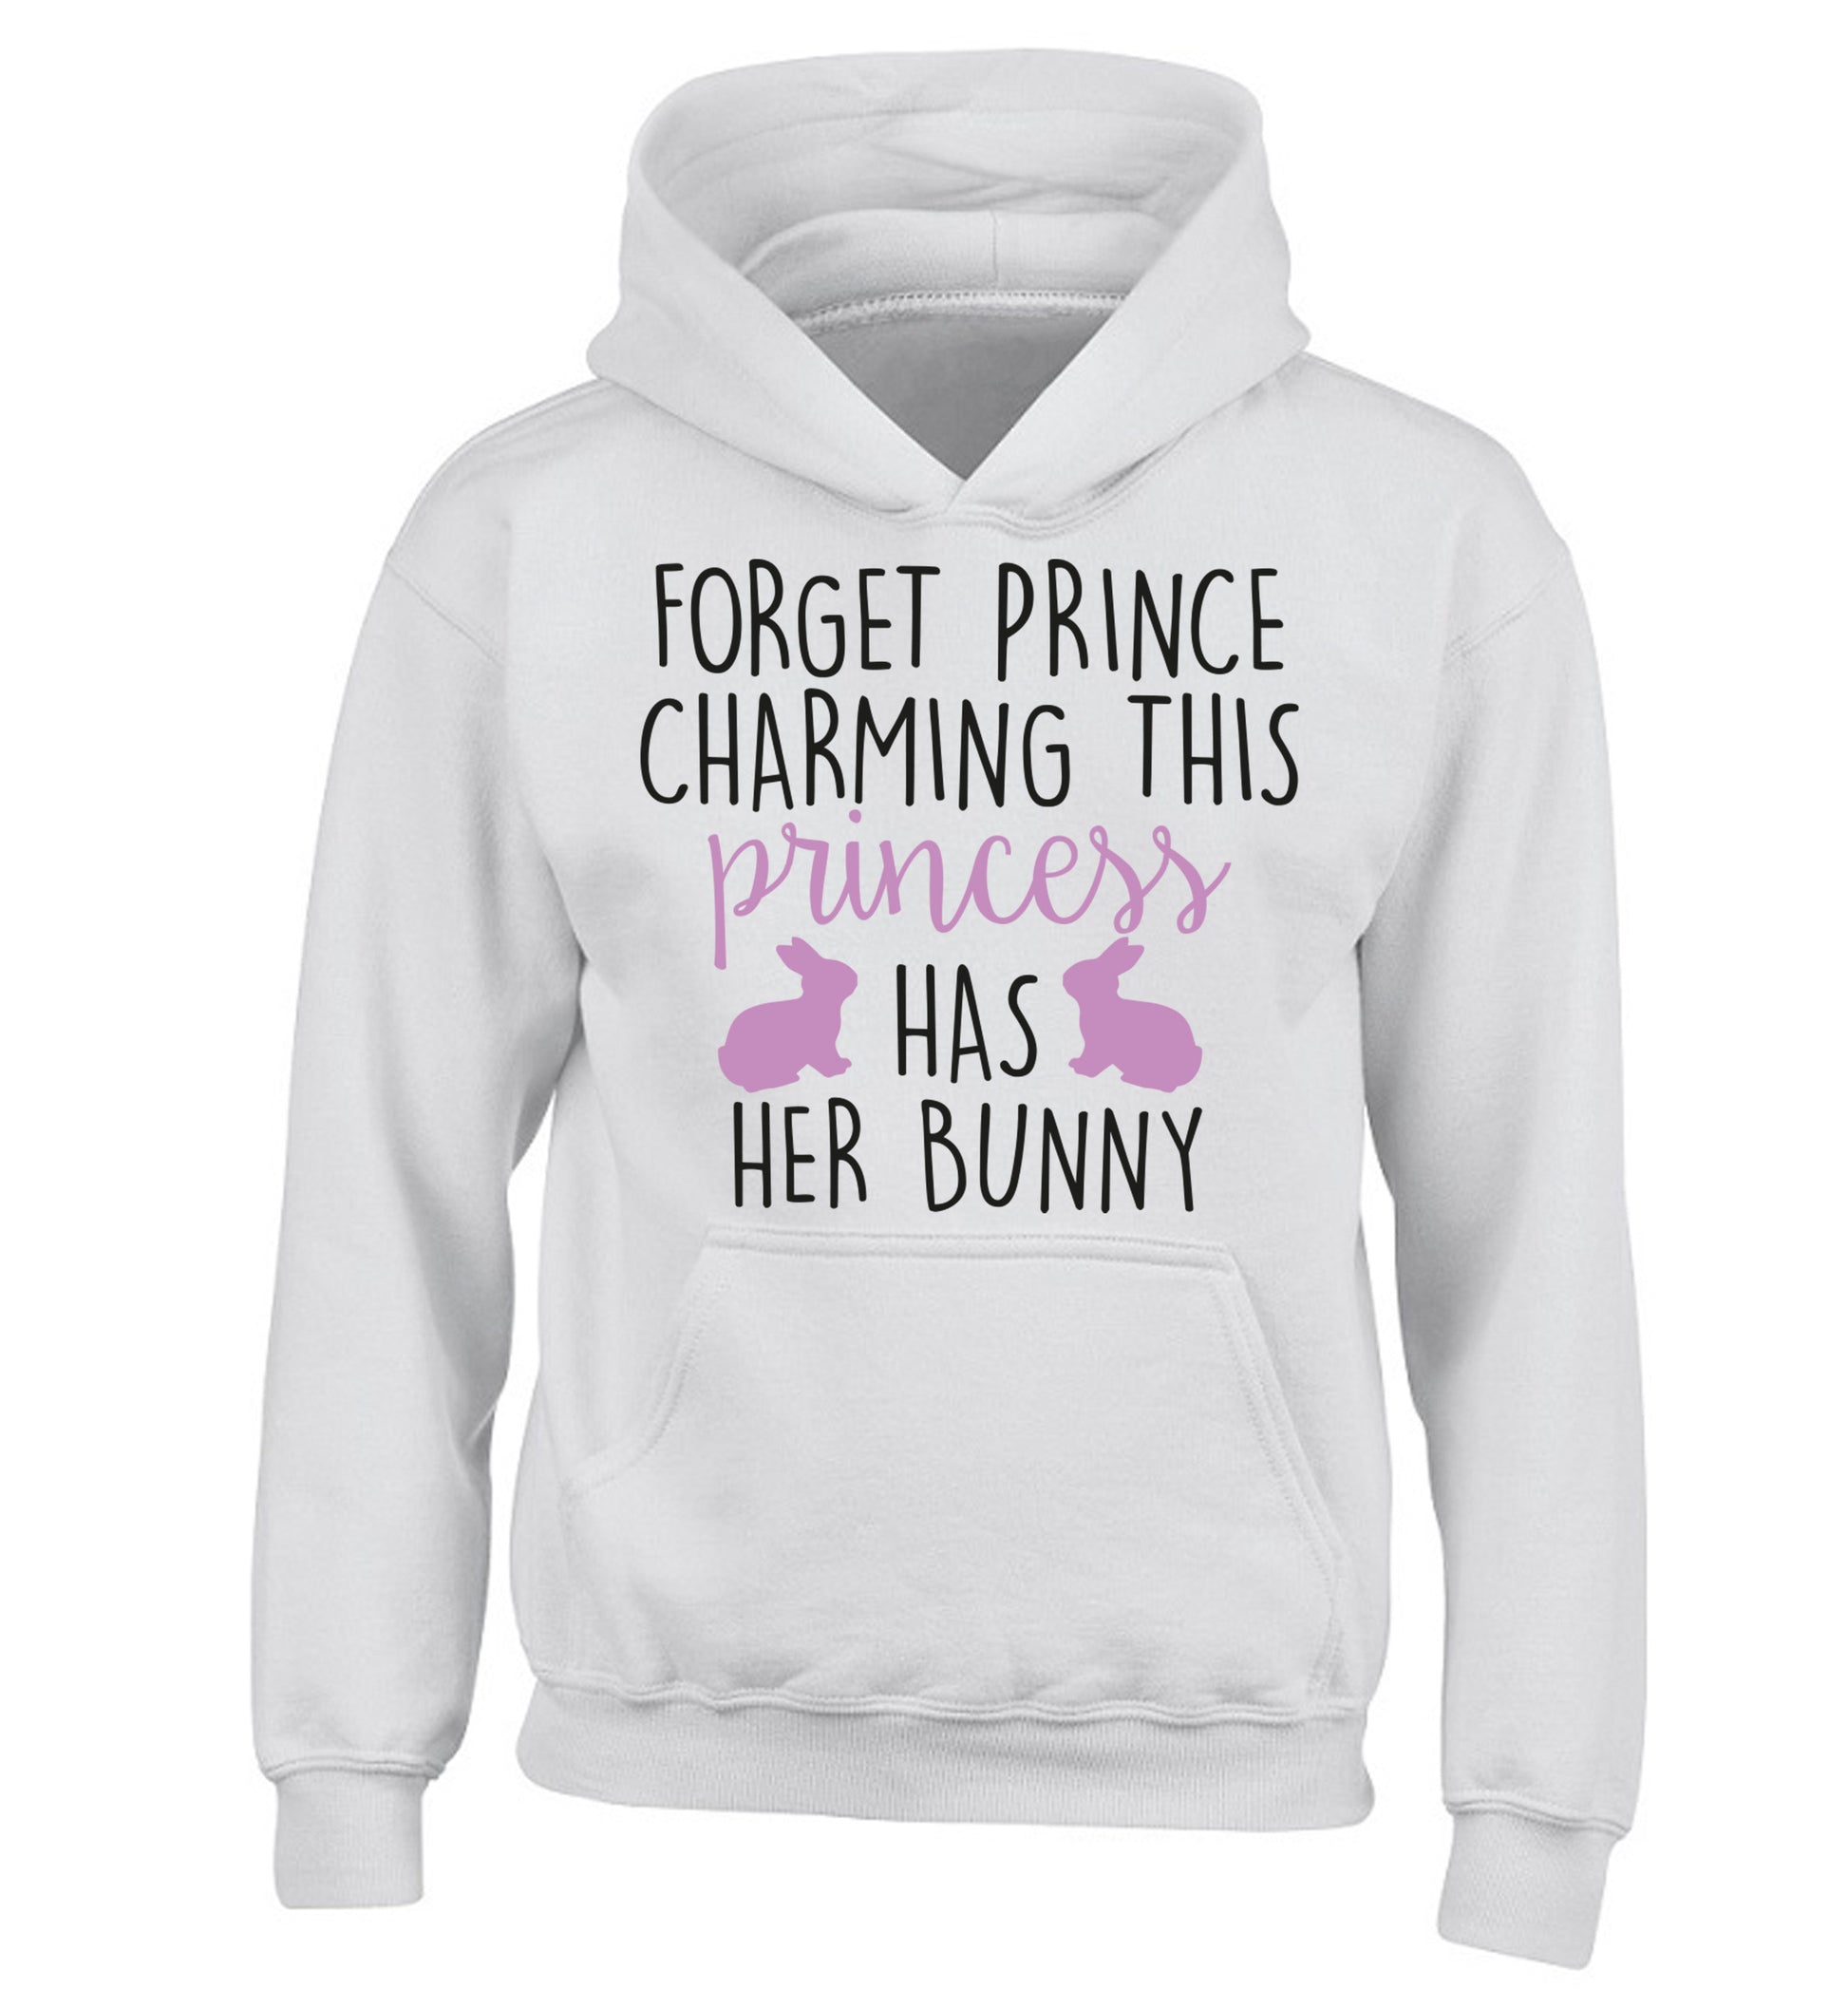 Forget prince charming this princess has her bunny children's white hoodie 12-14 Years